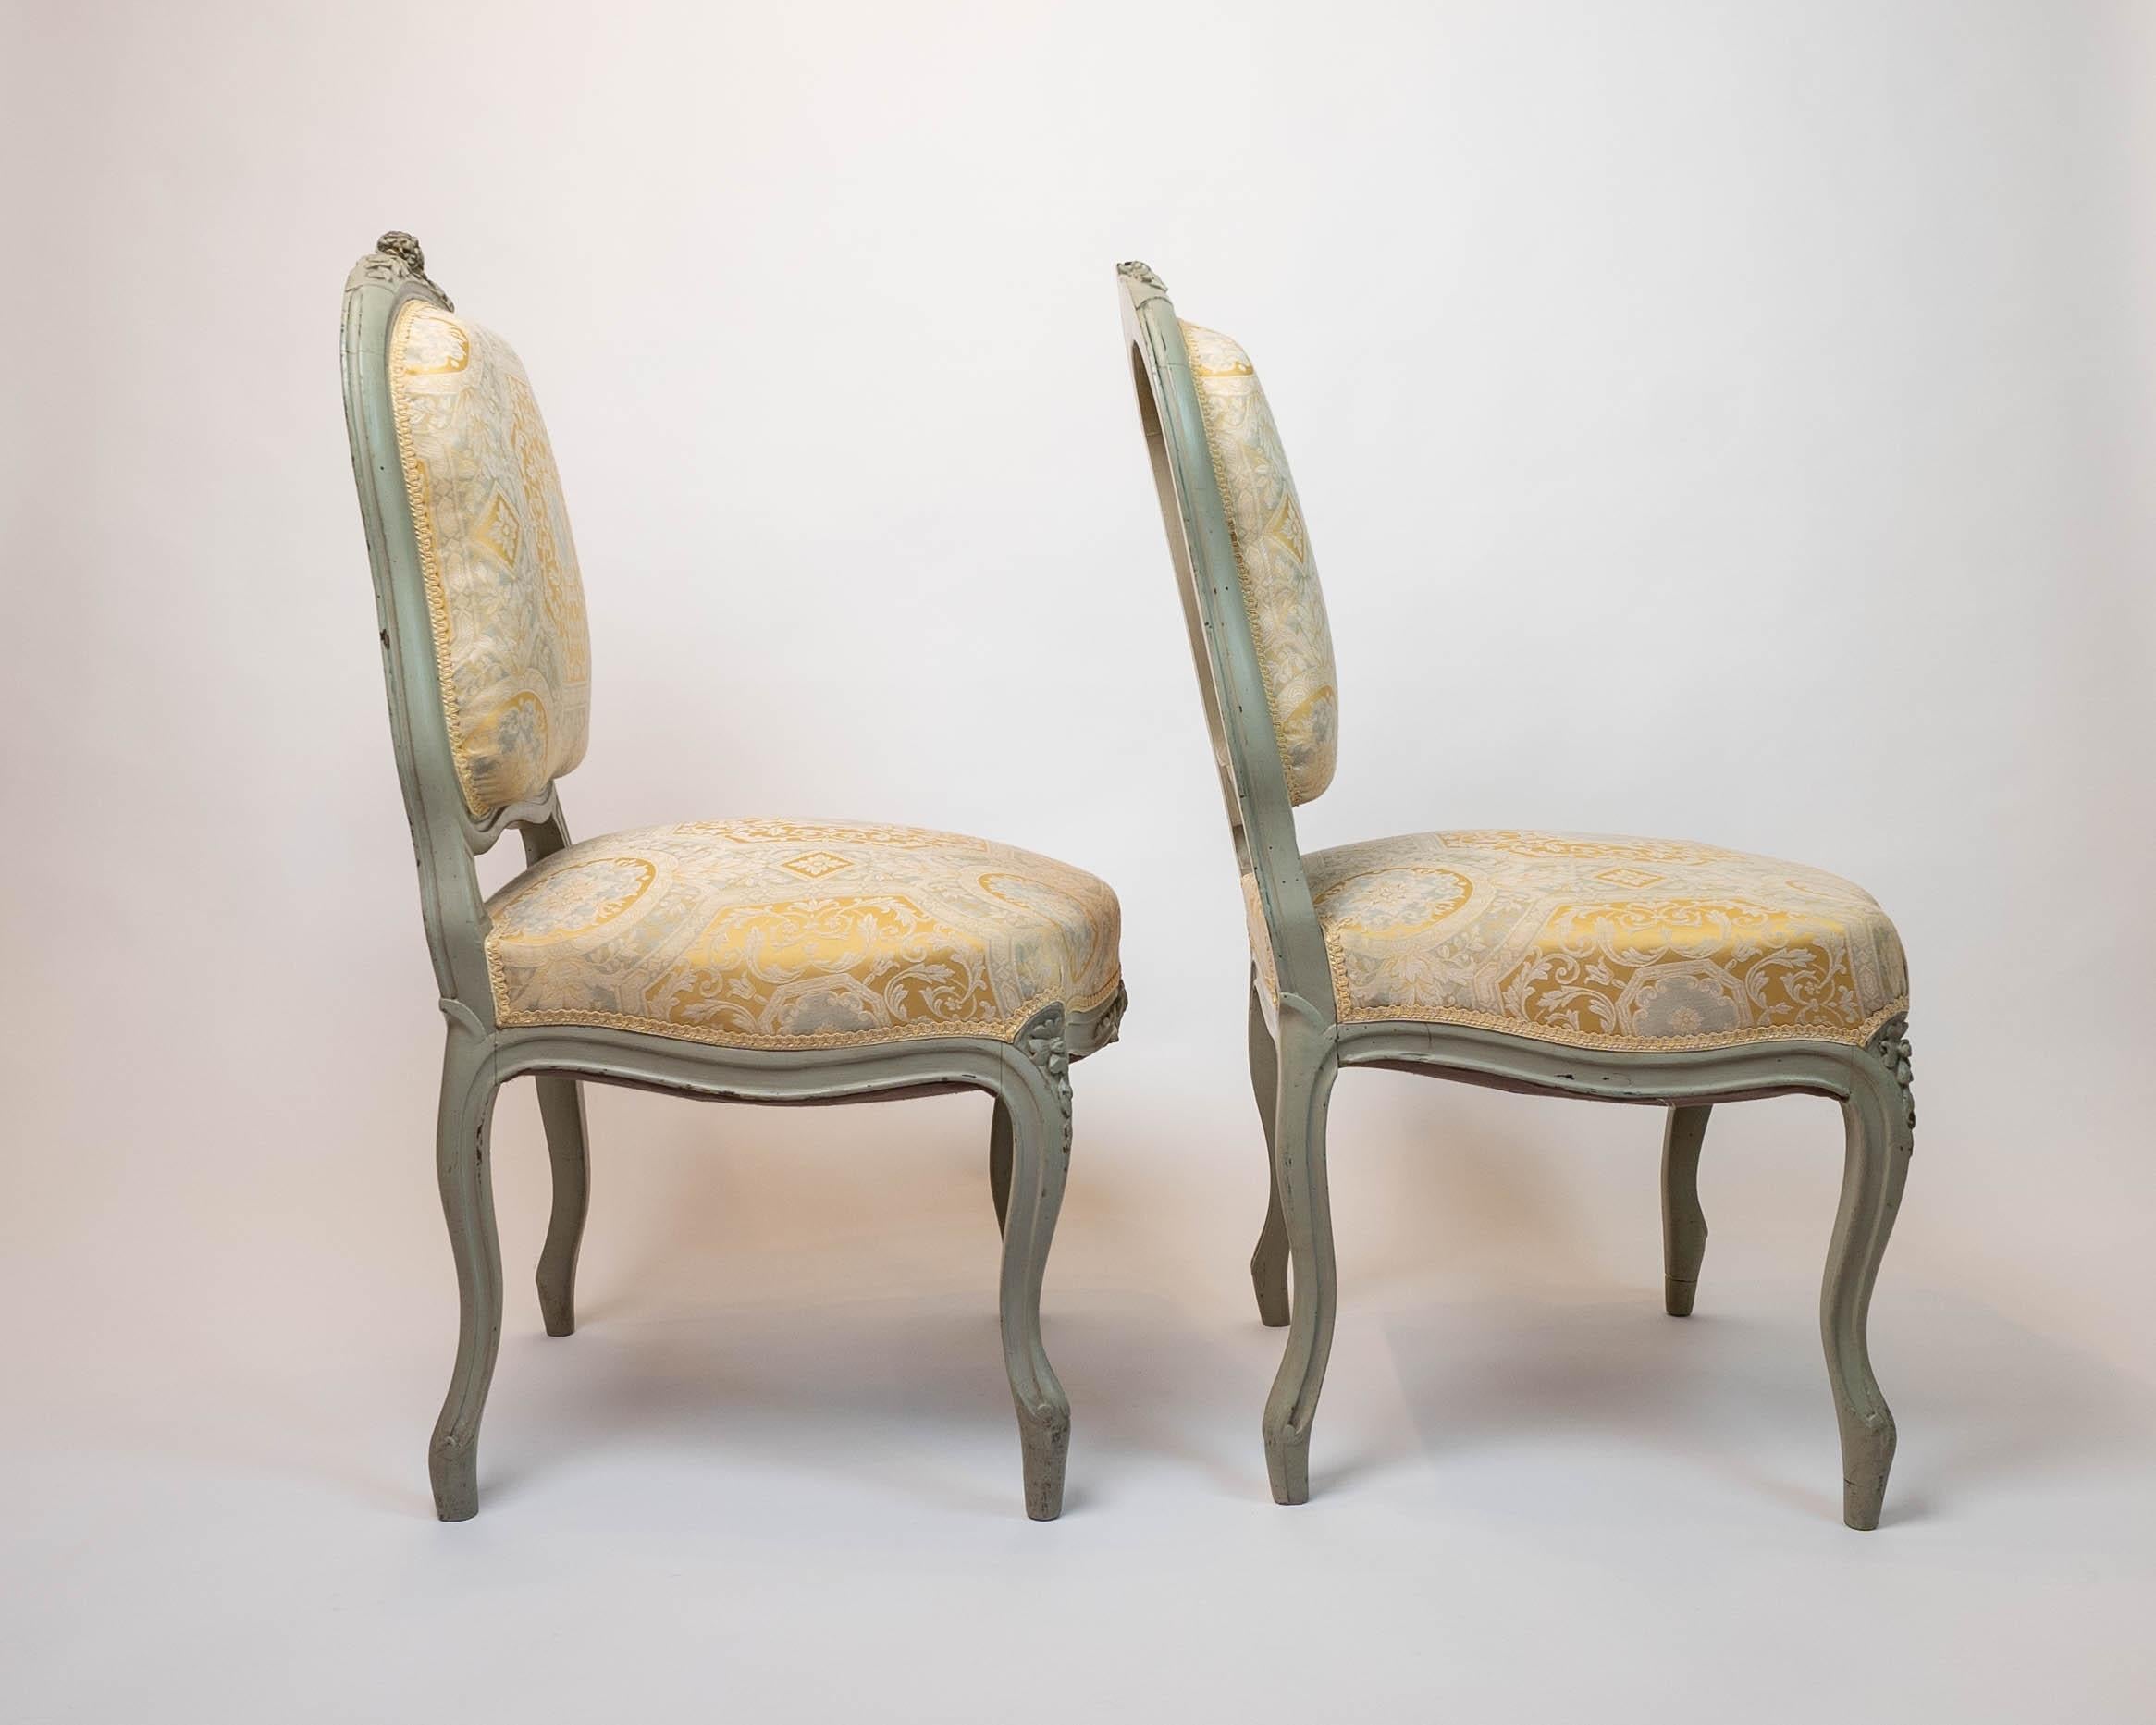 Pair of antique French Louis XV style painted, hand carved side chairs newly custom upholstered with high-grade fabric and trim. Late 1800’s, from a Chateau in Deauville, France.